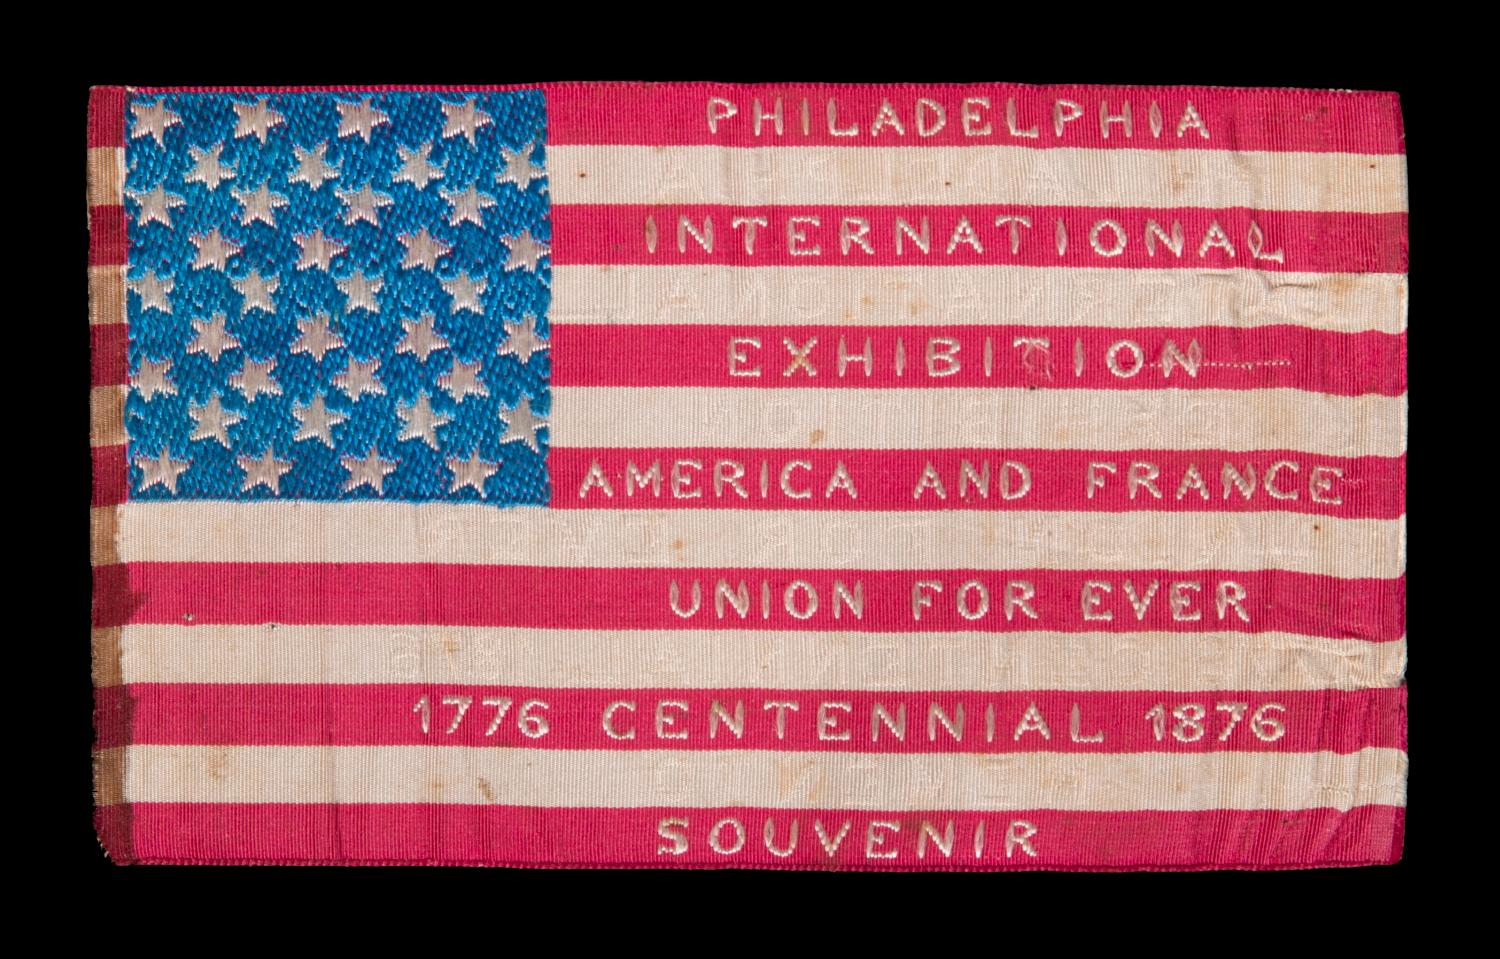 EXTRAORDINARY SILK FLAG MADE FOR THE 1876 CENTENNIAL INTERNATIONAL EXPOSITION IN PHILADELPHIA, WITH WOVEN TEXT ON EITHER SIDE, PROBABLY MADE AT ONE OF THE FRENCH EXHIBITS AT THE FAIR AND SOLD AS A SOUVENIR 

American national flag, made of silk, for